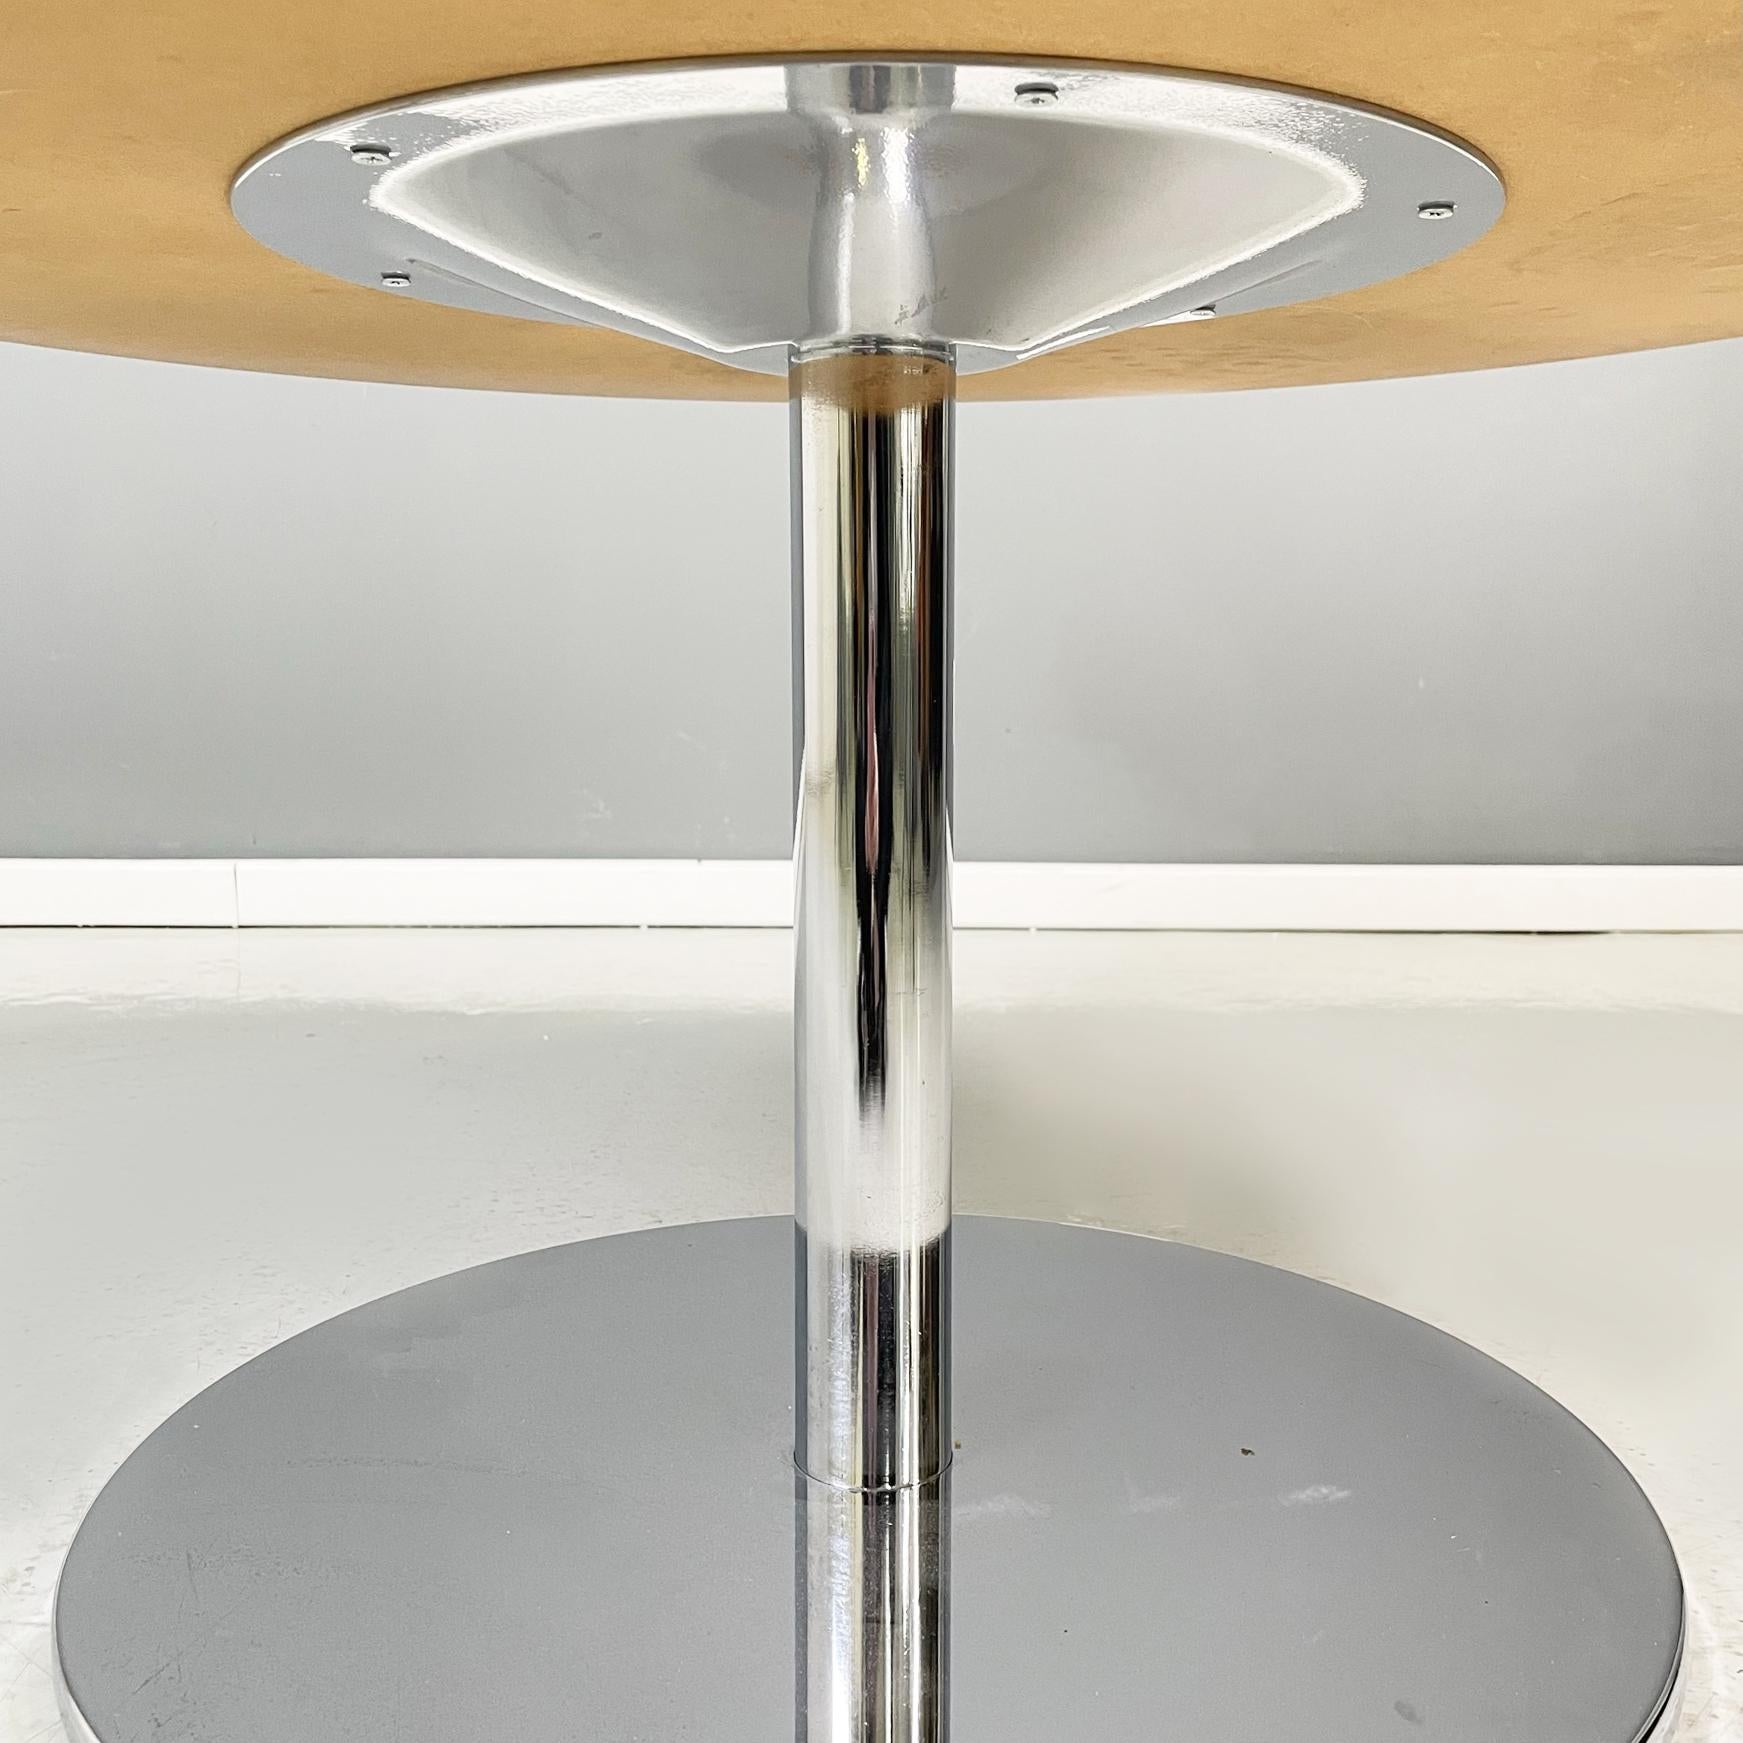 Italian Modern Round Coffe Table in White Wood and Metal, 1980s For Sale 5